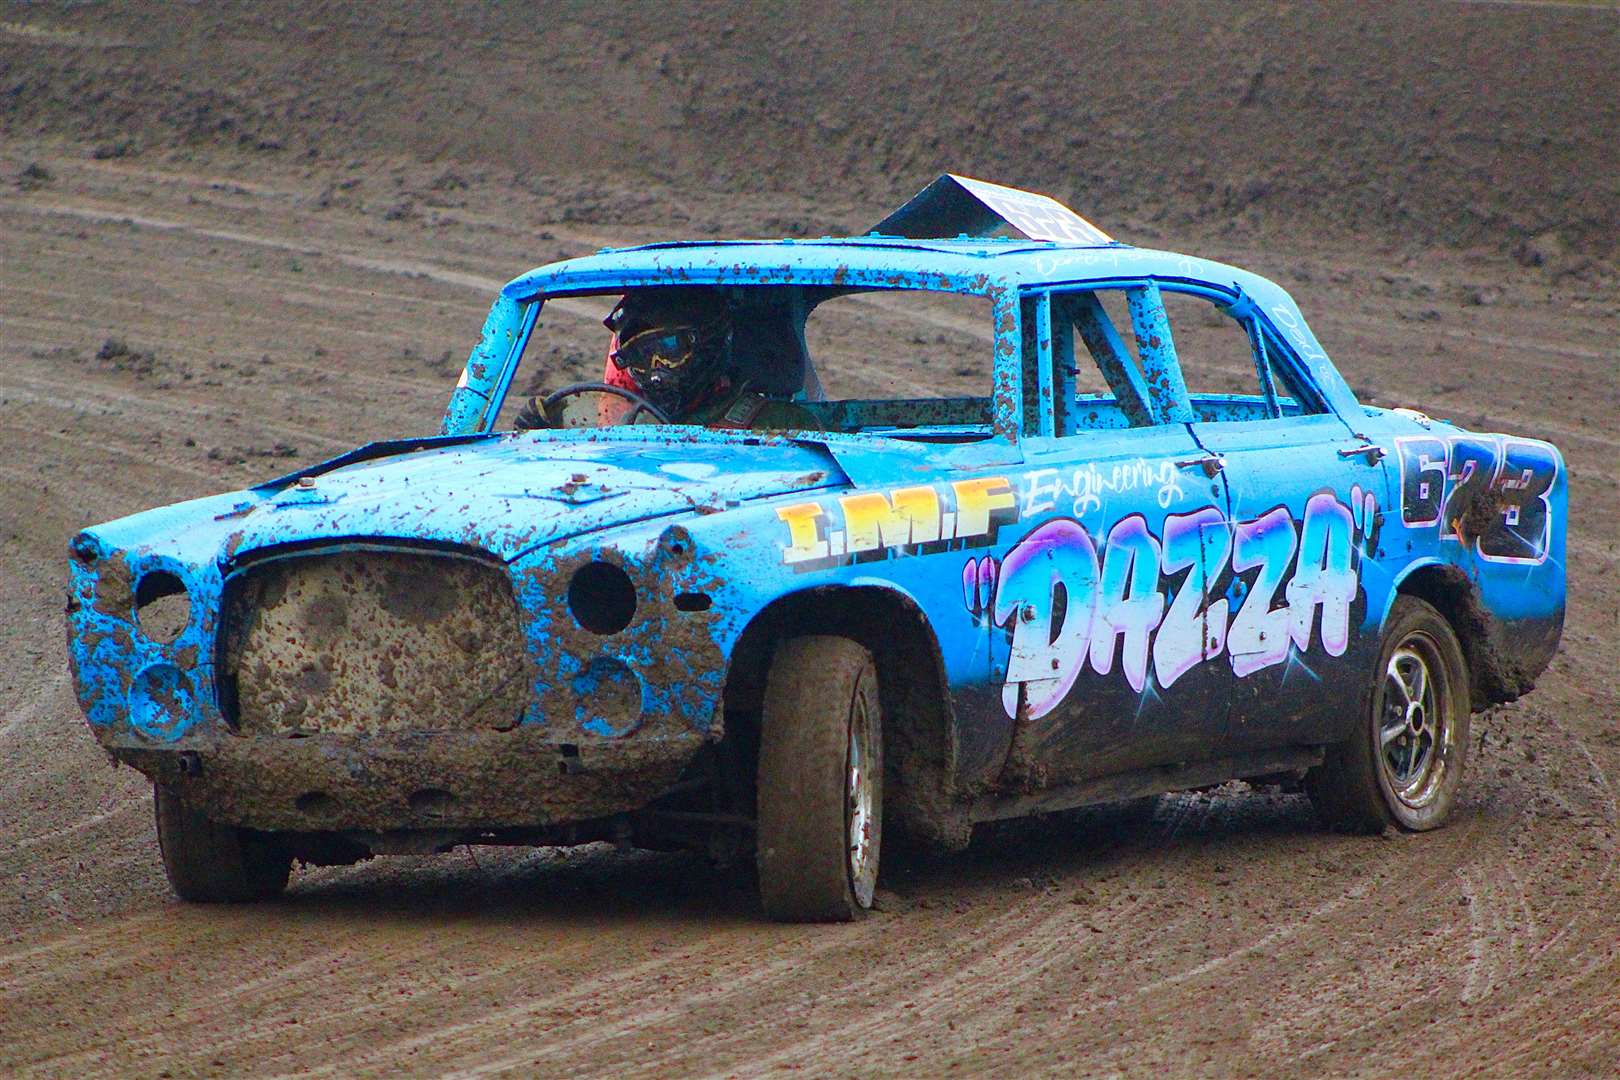 King’s Lynn’s Darren Fendley showed great pace in the wet conditions in his smart Rover P5. Photo: Kieran Bonsall